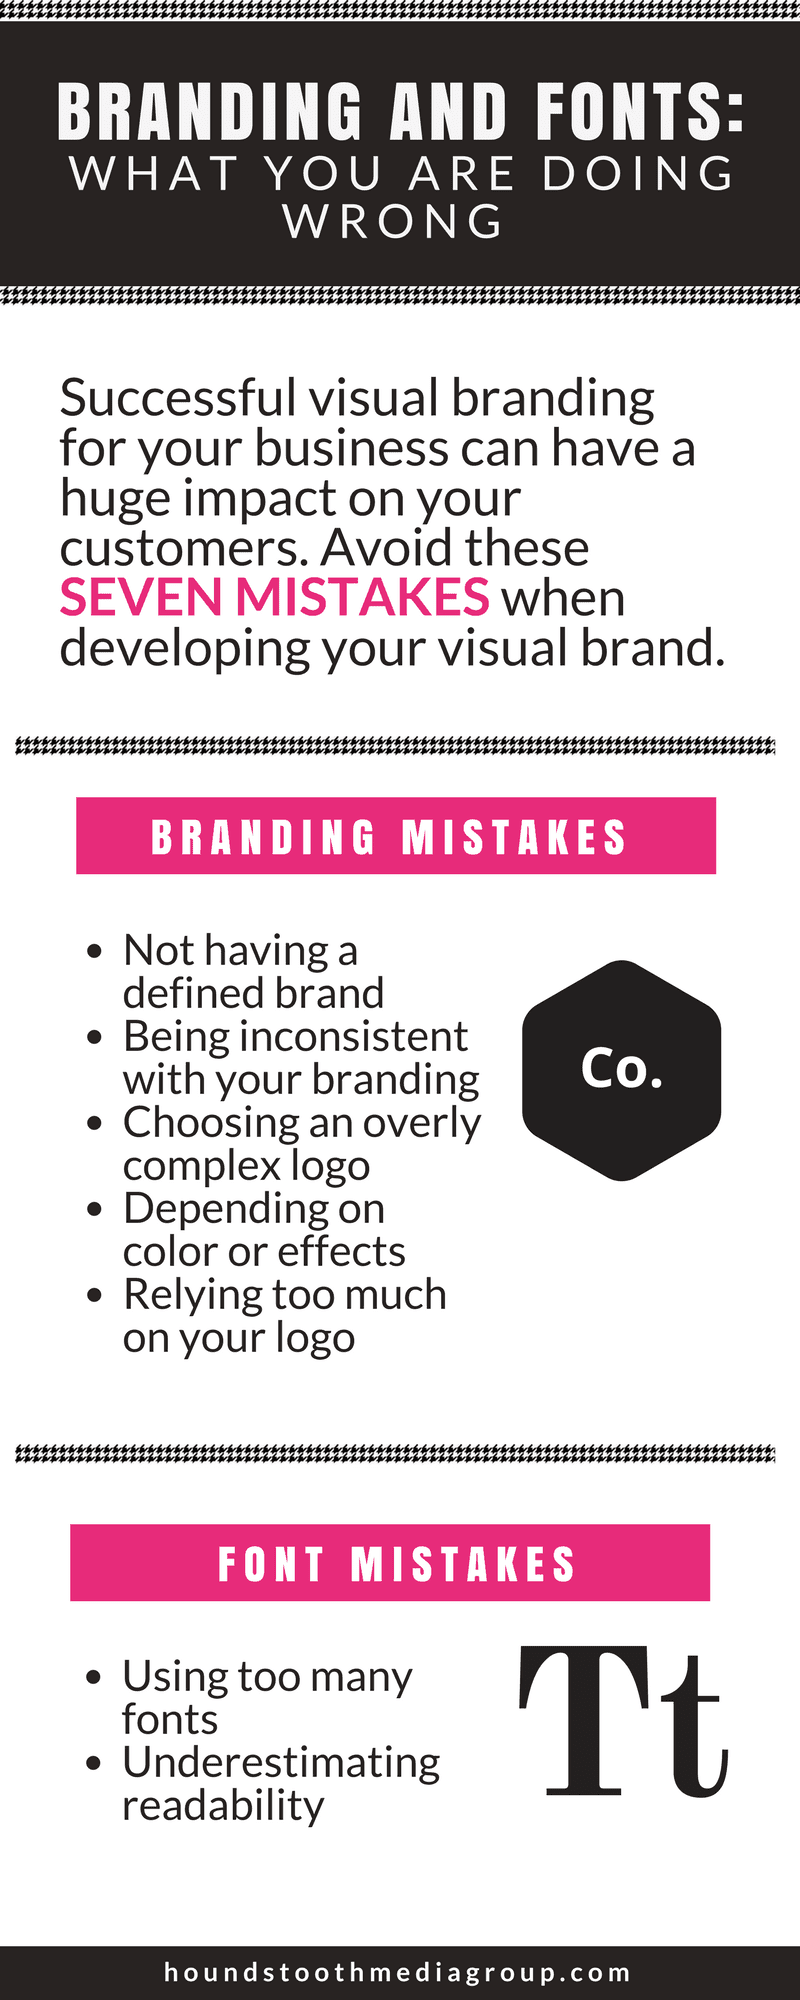 branding and fonts: mistakes you may be making